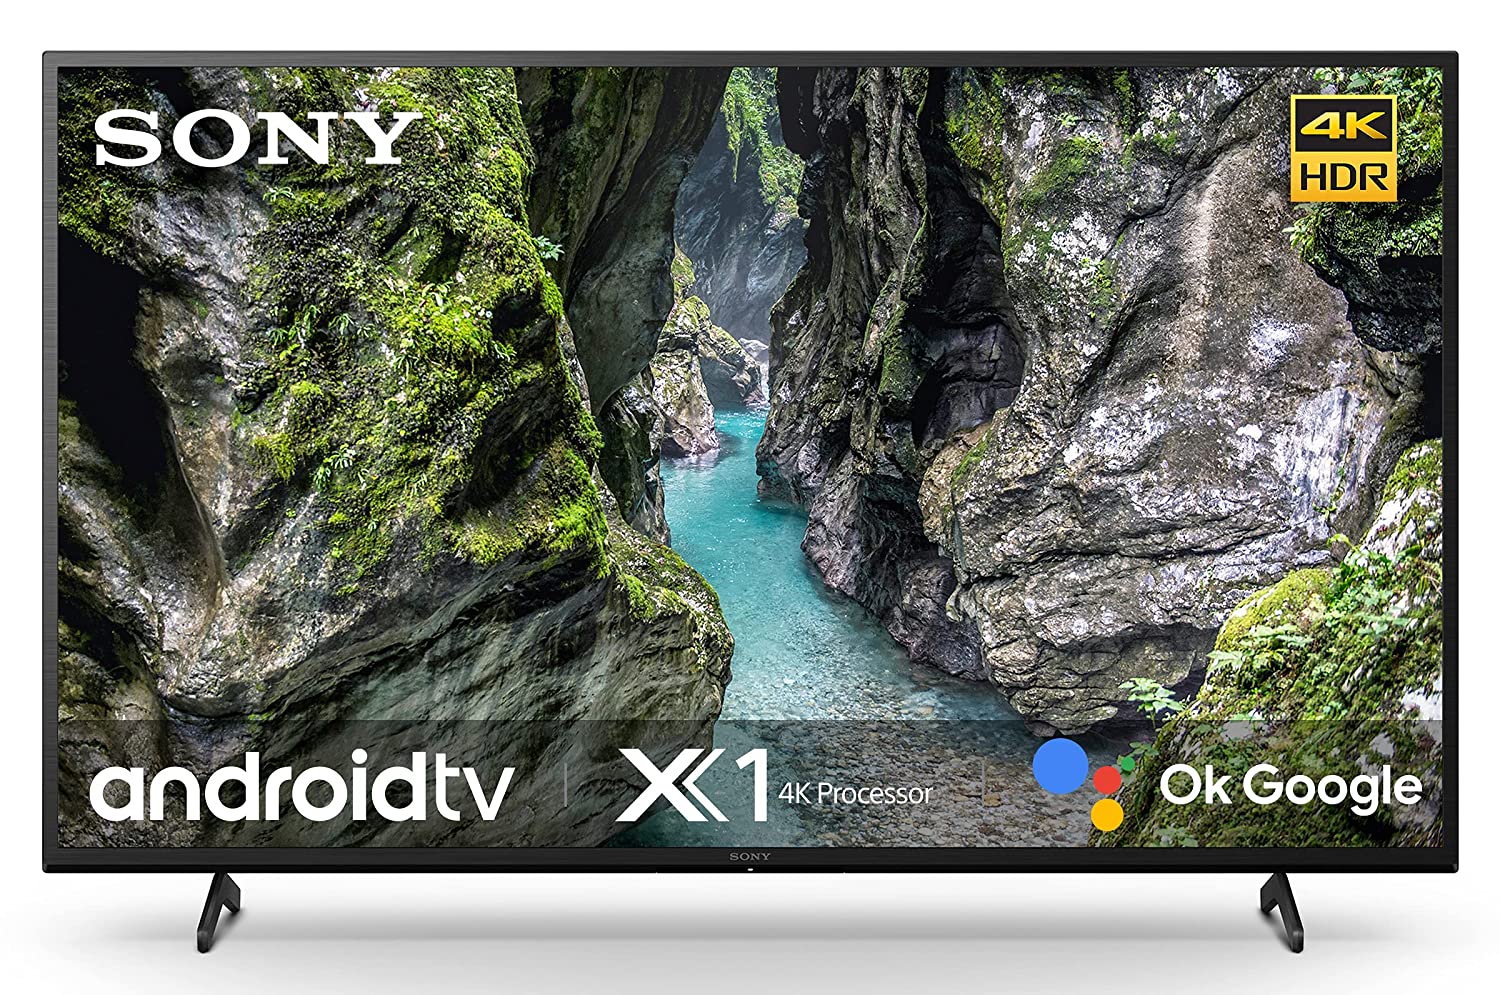 Sony Bravia 108 cm (43 inches) 4K Ultra HD Smart Android LED TV KD-43X75 (Black) (2021 Model) with A